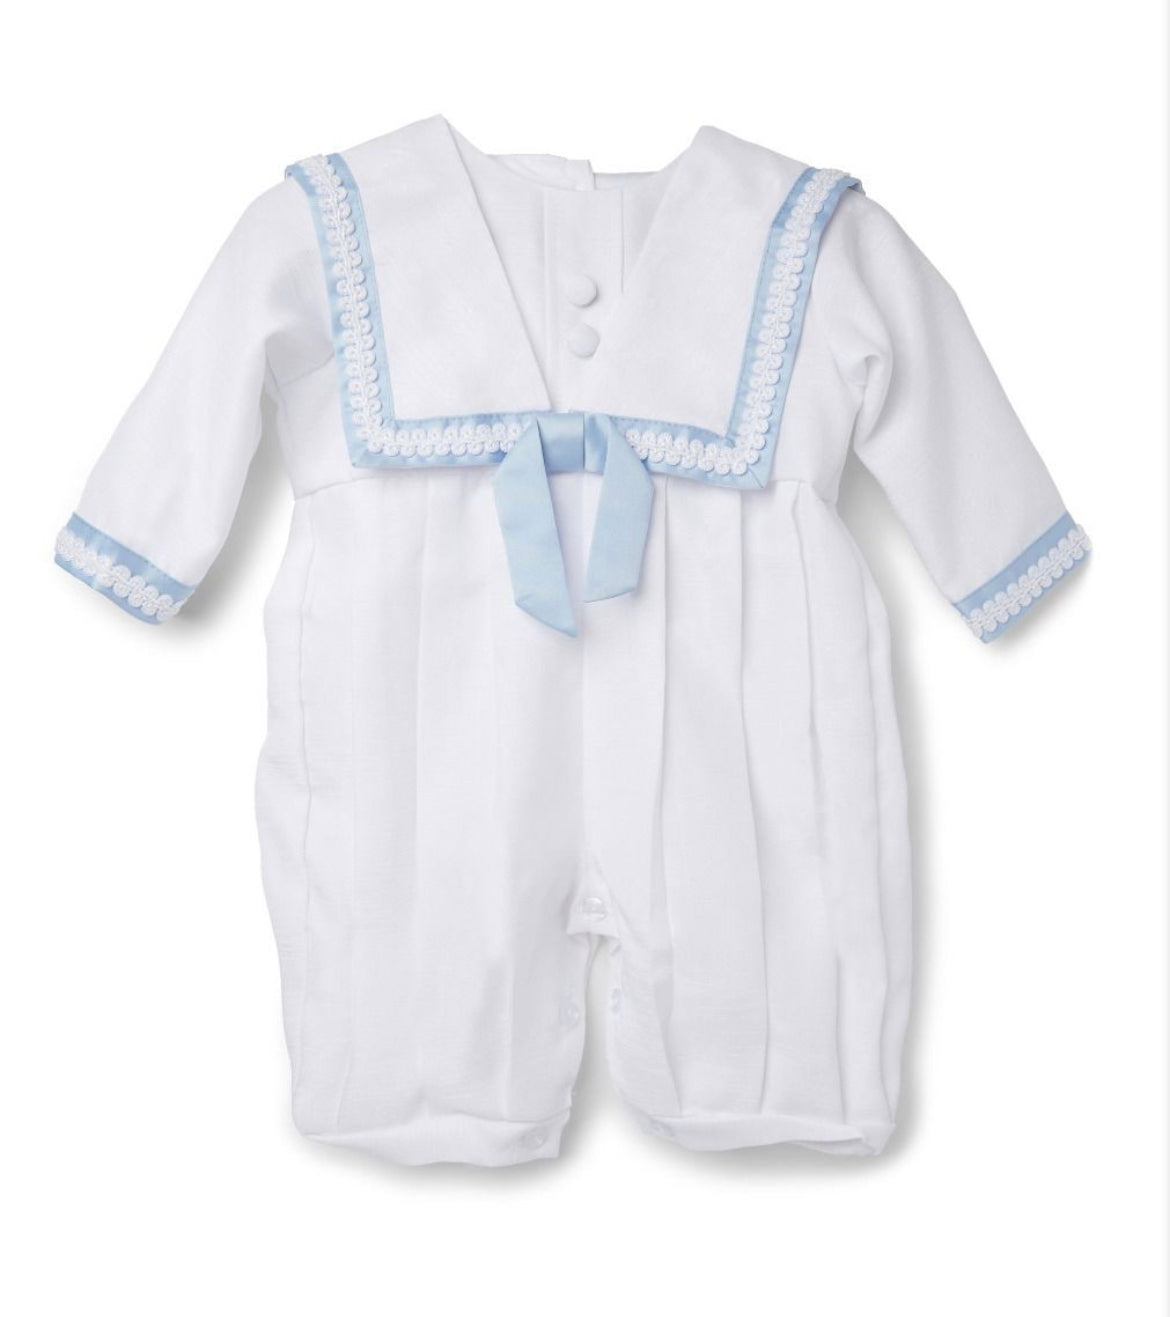 “William” Christening Suit - White with Blue